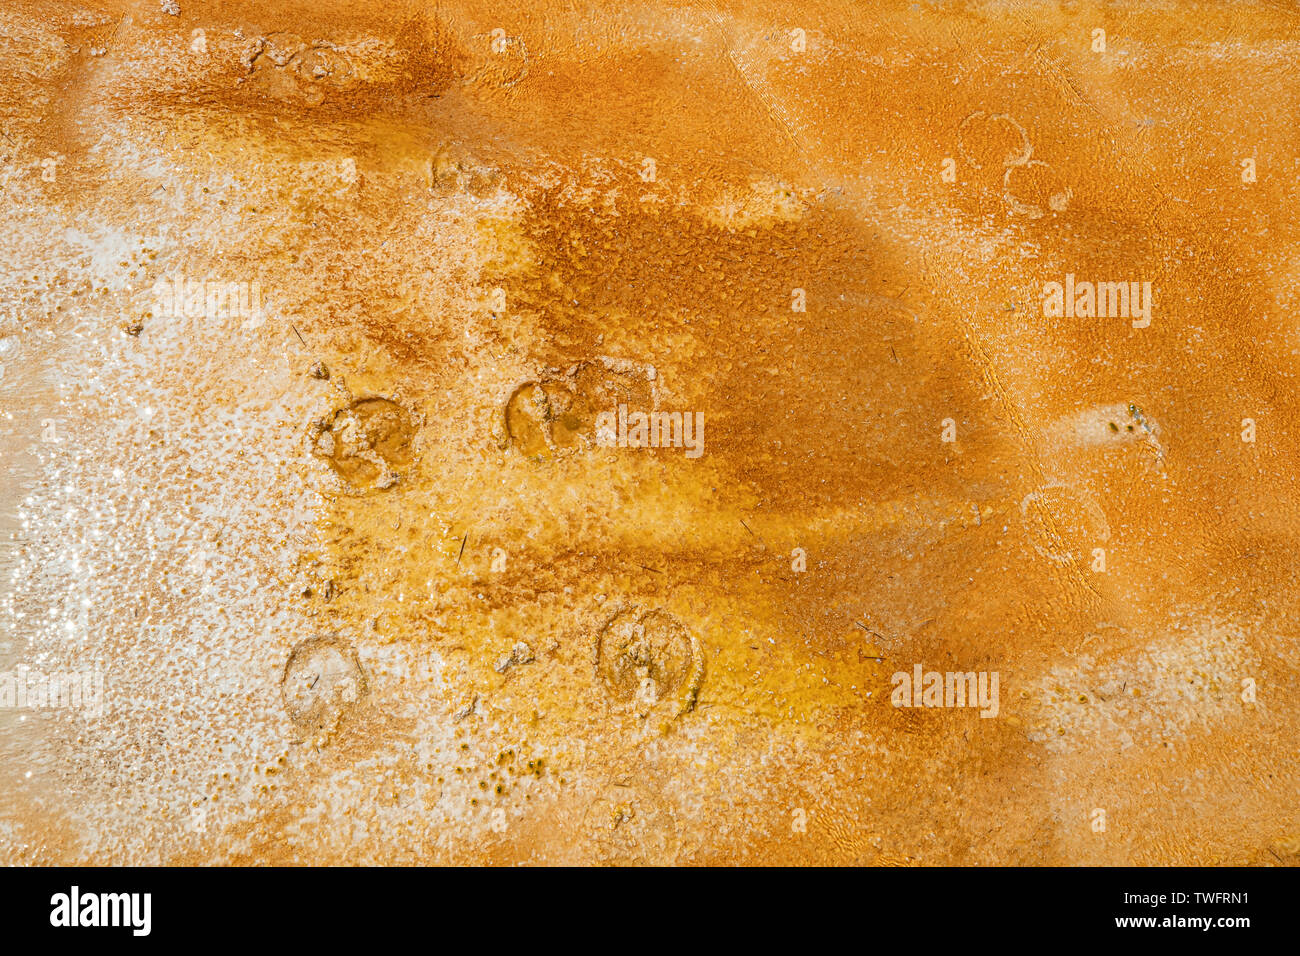 Bison hoof prints in the minerals of hot springs, Old Faithful, Yellowstone, Wyoming Stock Photo